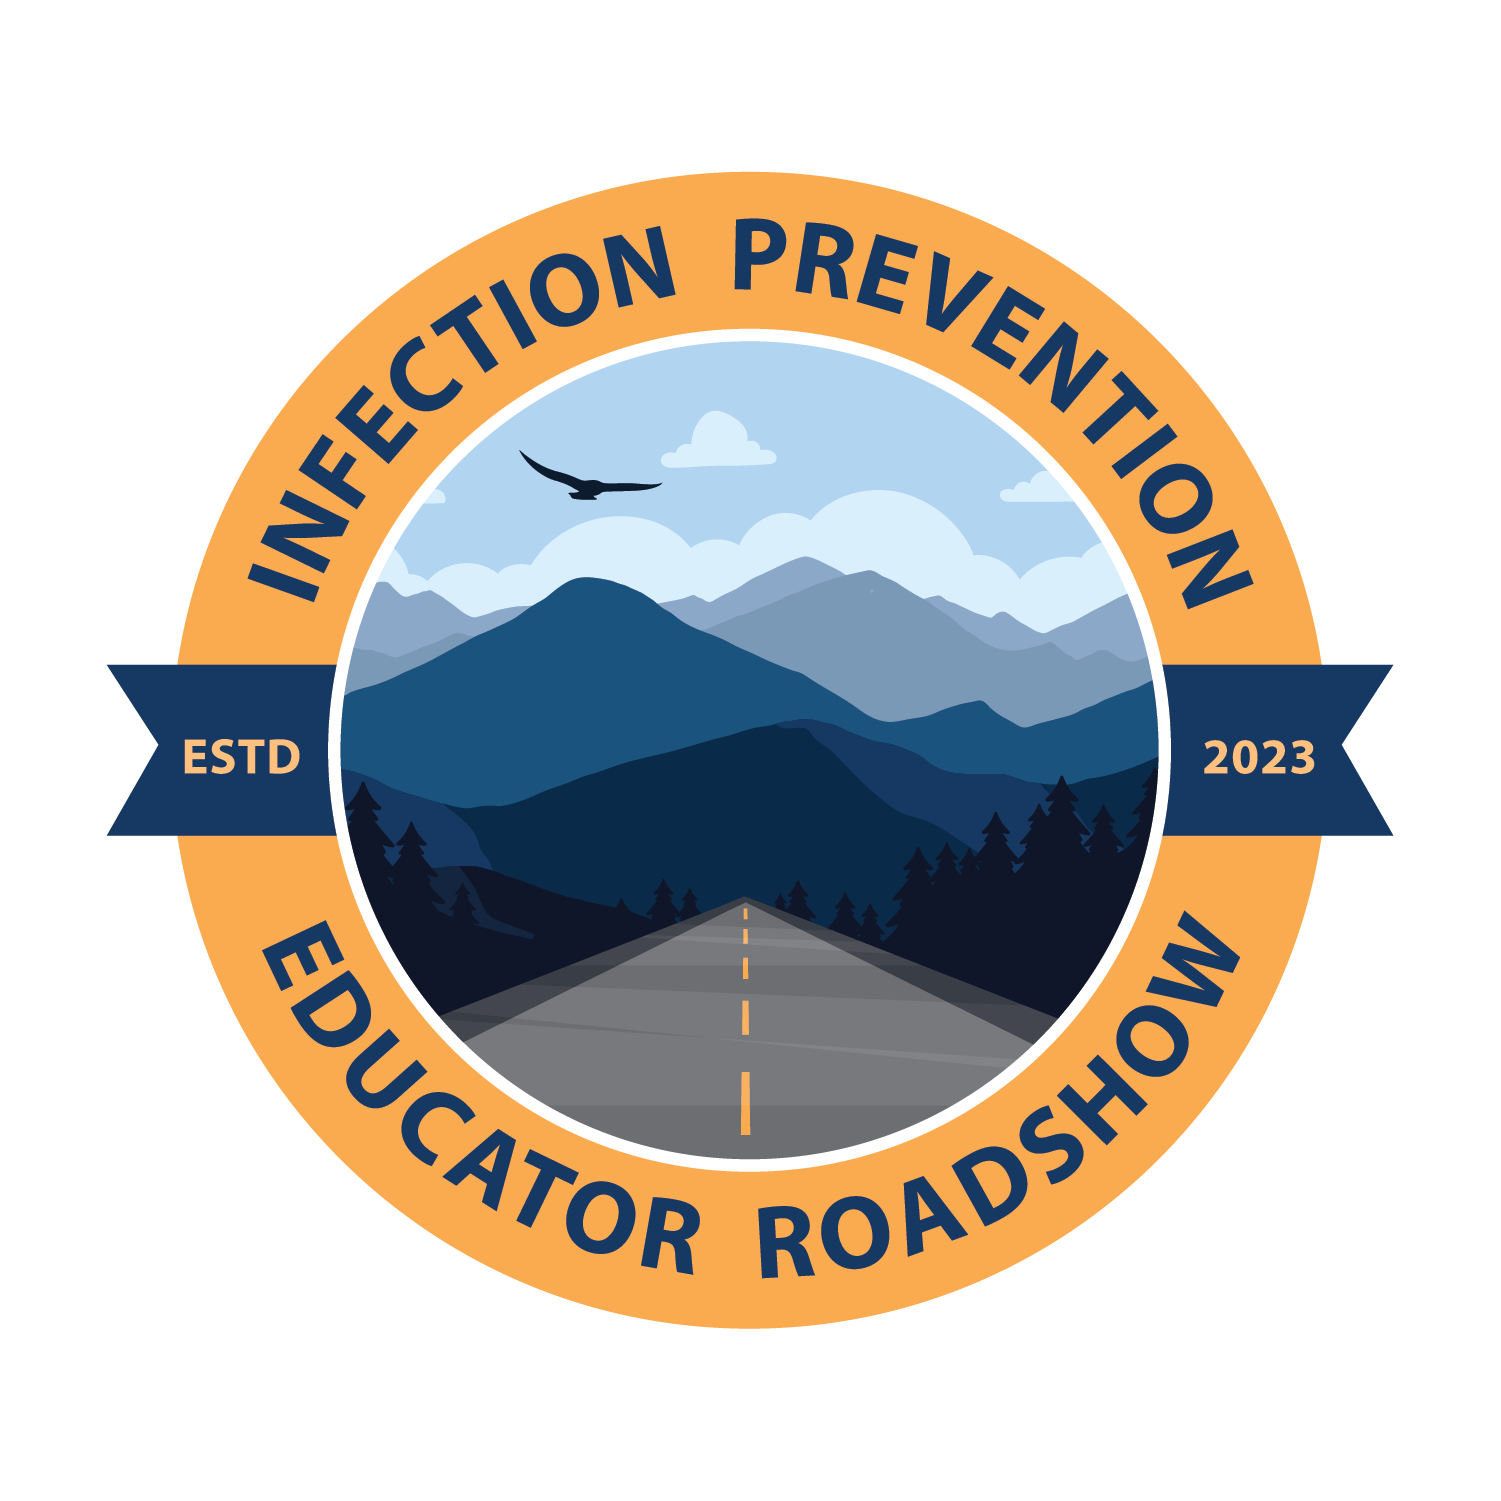 Infection Prevention Educator Roadshow Logo - Gold and Navy showing a road leading into Virginia mountains